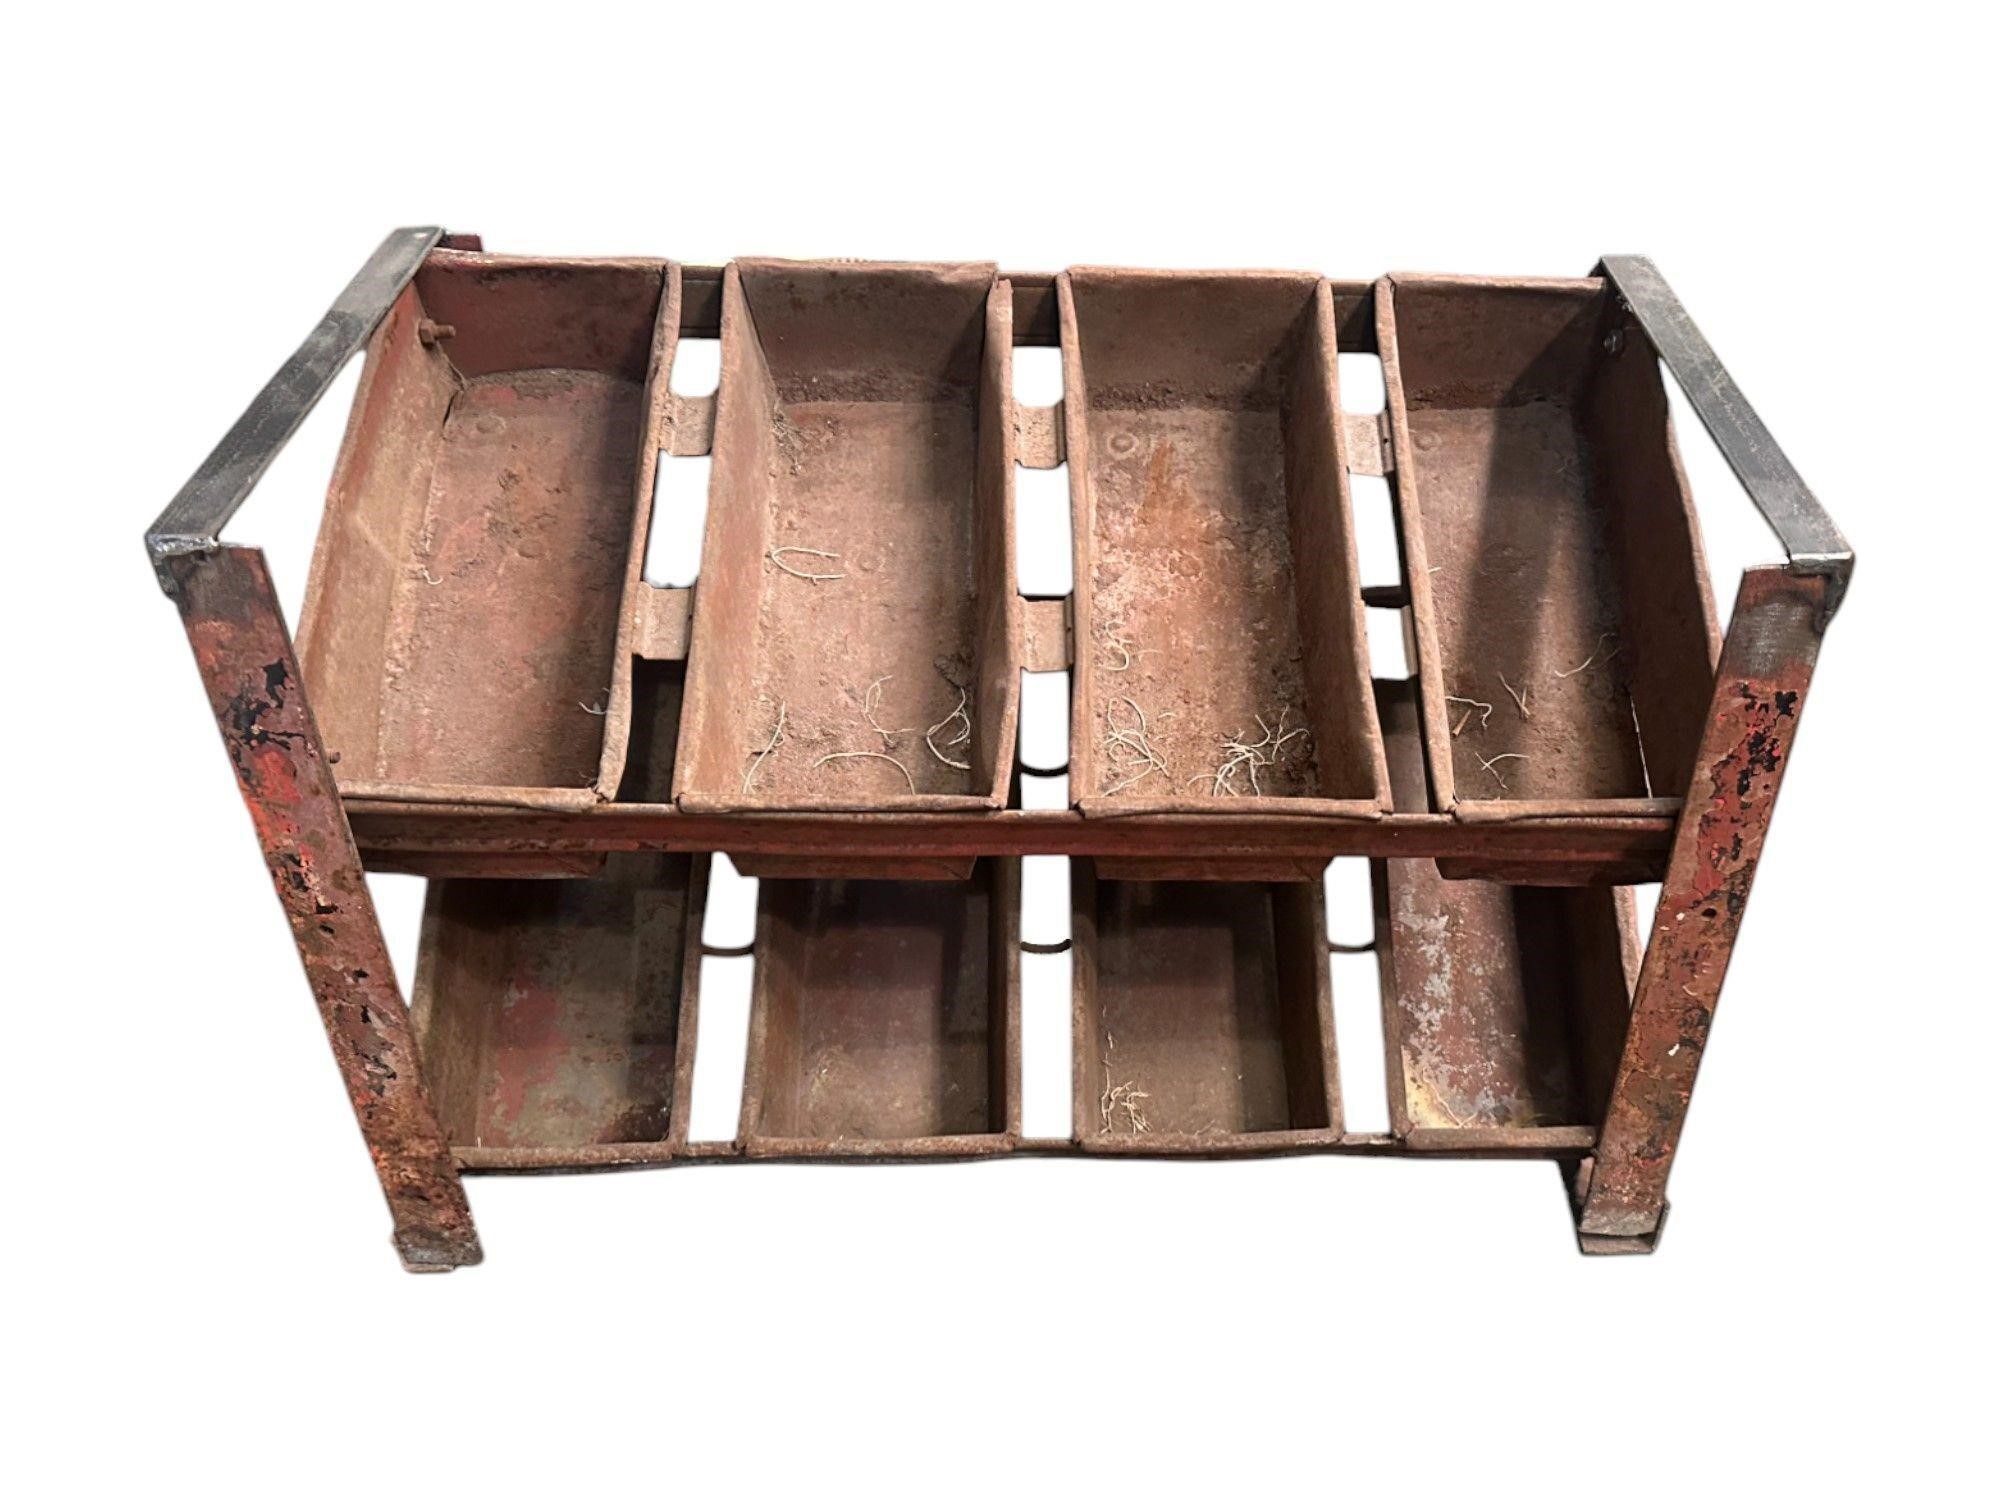 Industrial Iron Rack with 8 Bins